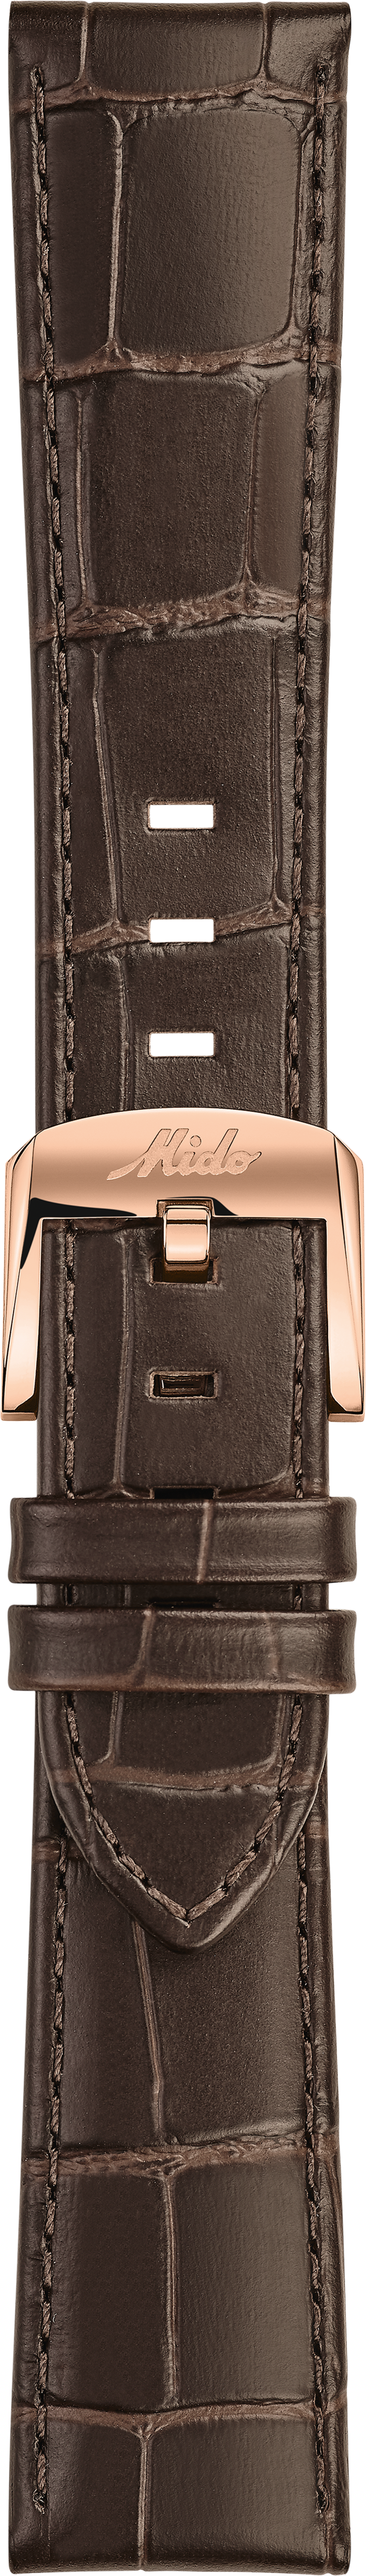 Mido Multifort brown cowhide leather strap